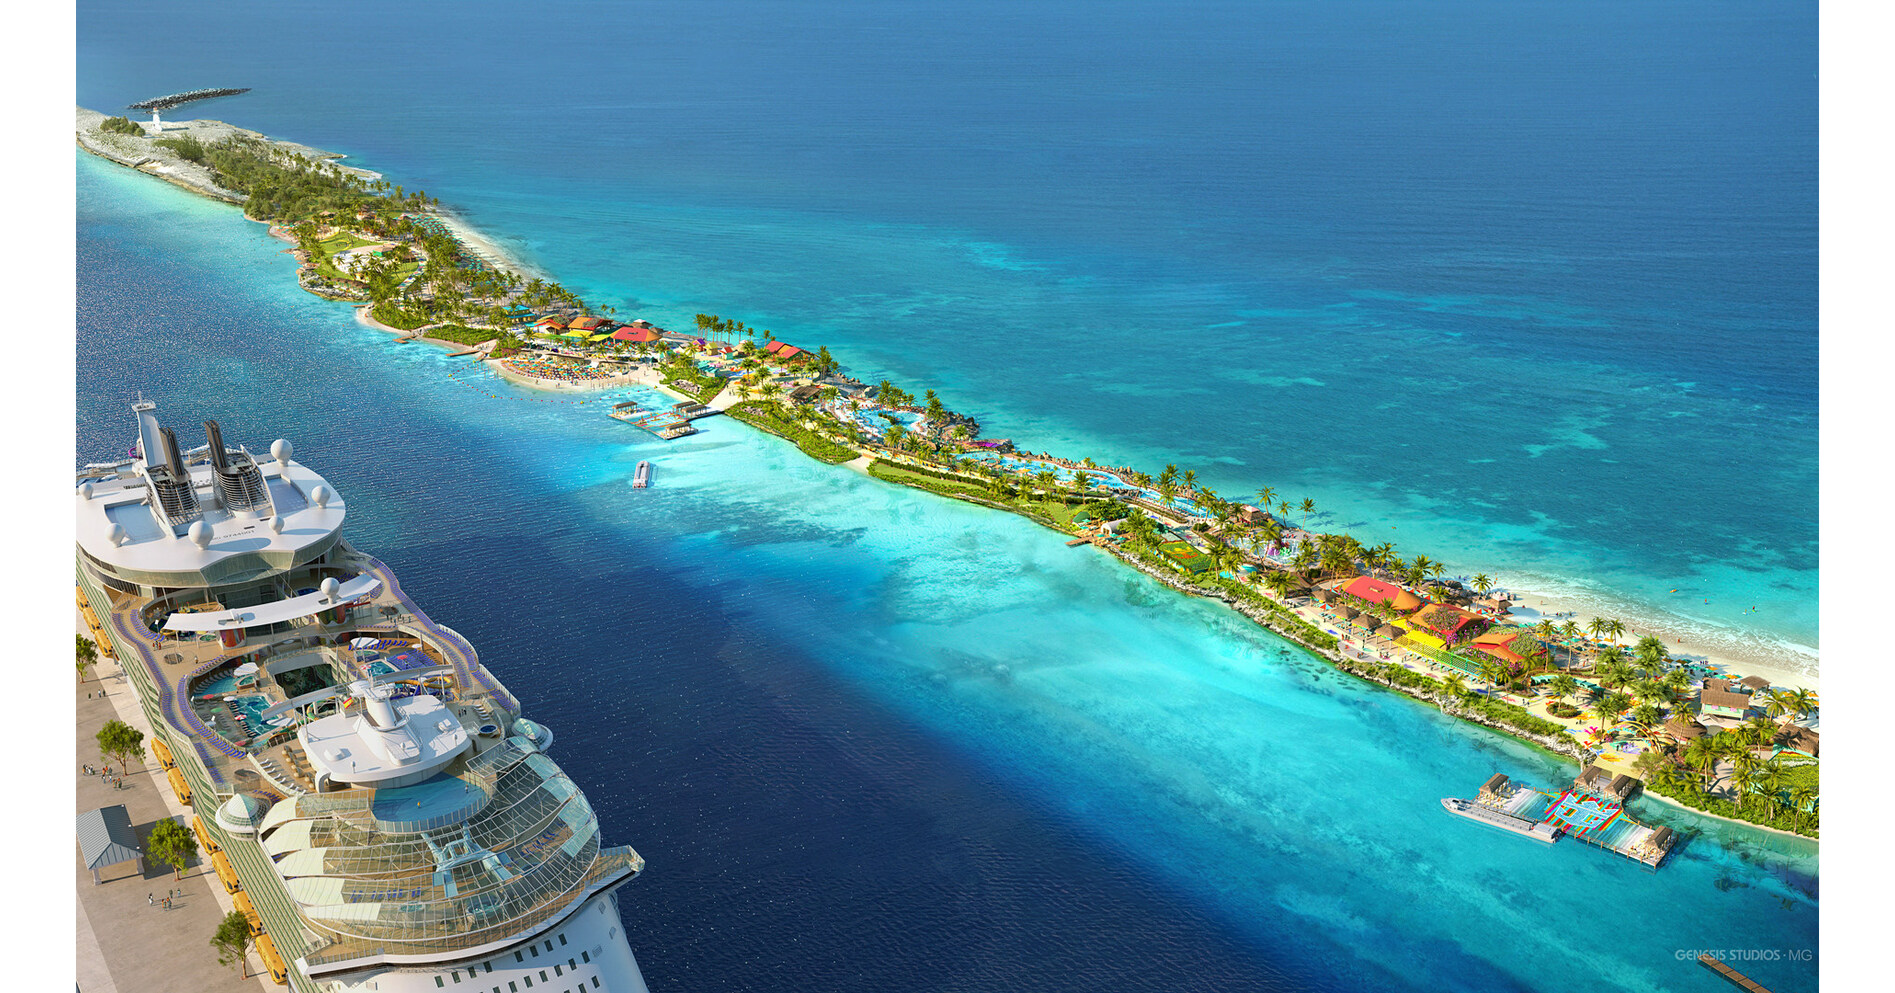 ROYAL CARIBBEAN'S BEACH CLUB IN THE BAHAMAS MOVES FORWARD FOR 2025 OPENING